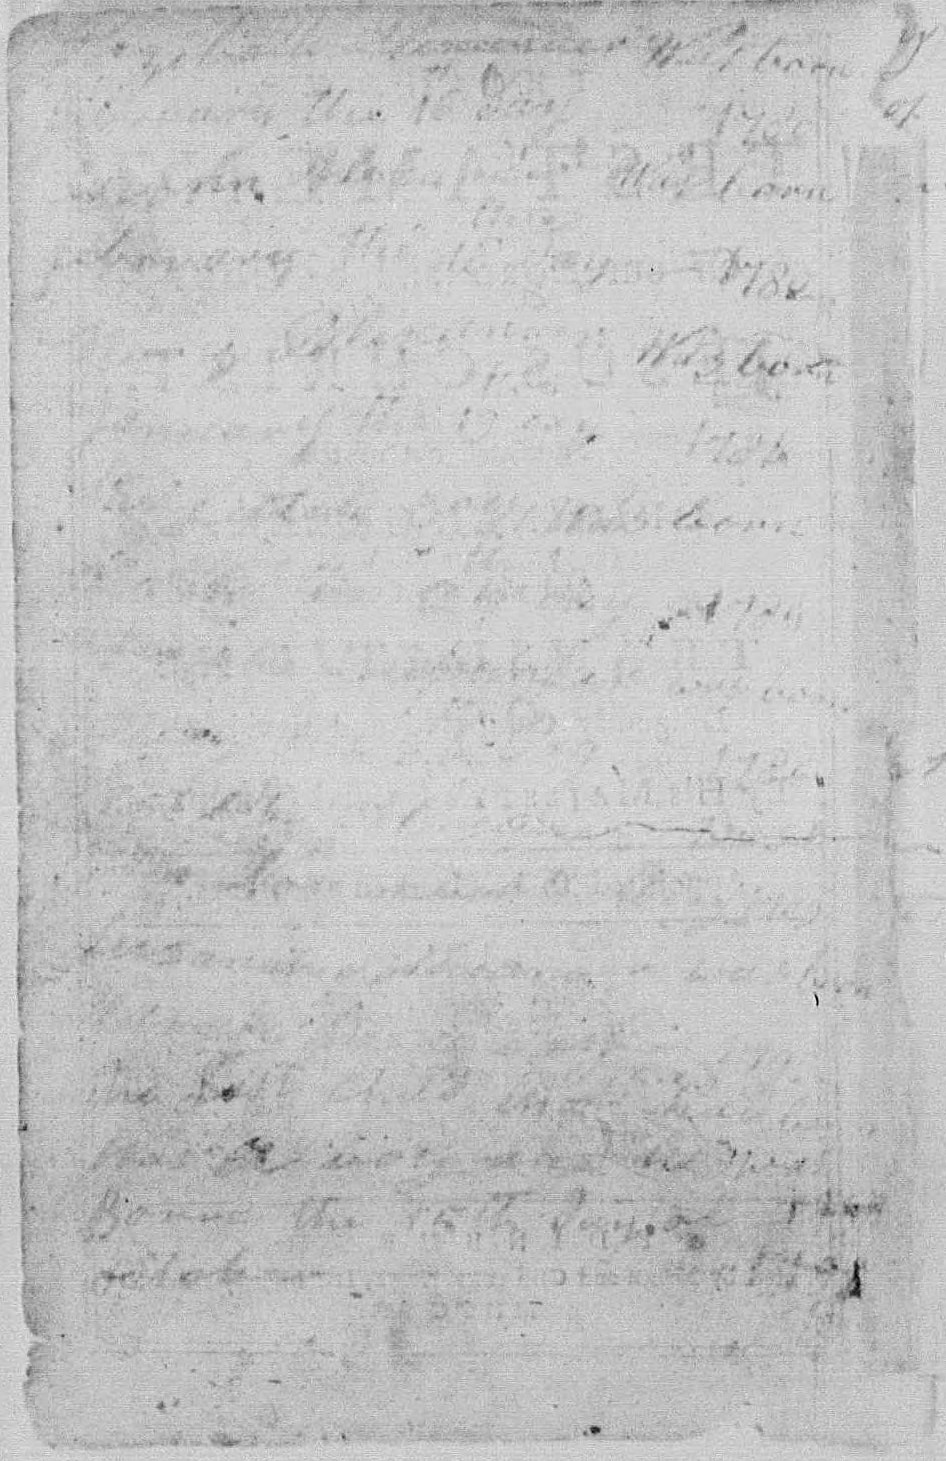 Family Record for John Alexander and Susana Alexander, 16 February 1780-19 March 1792